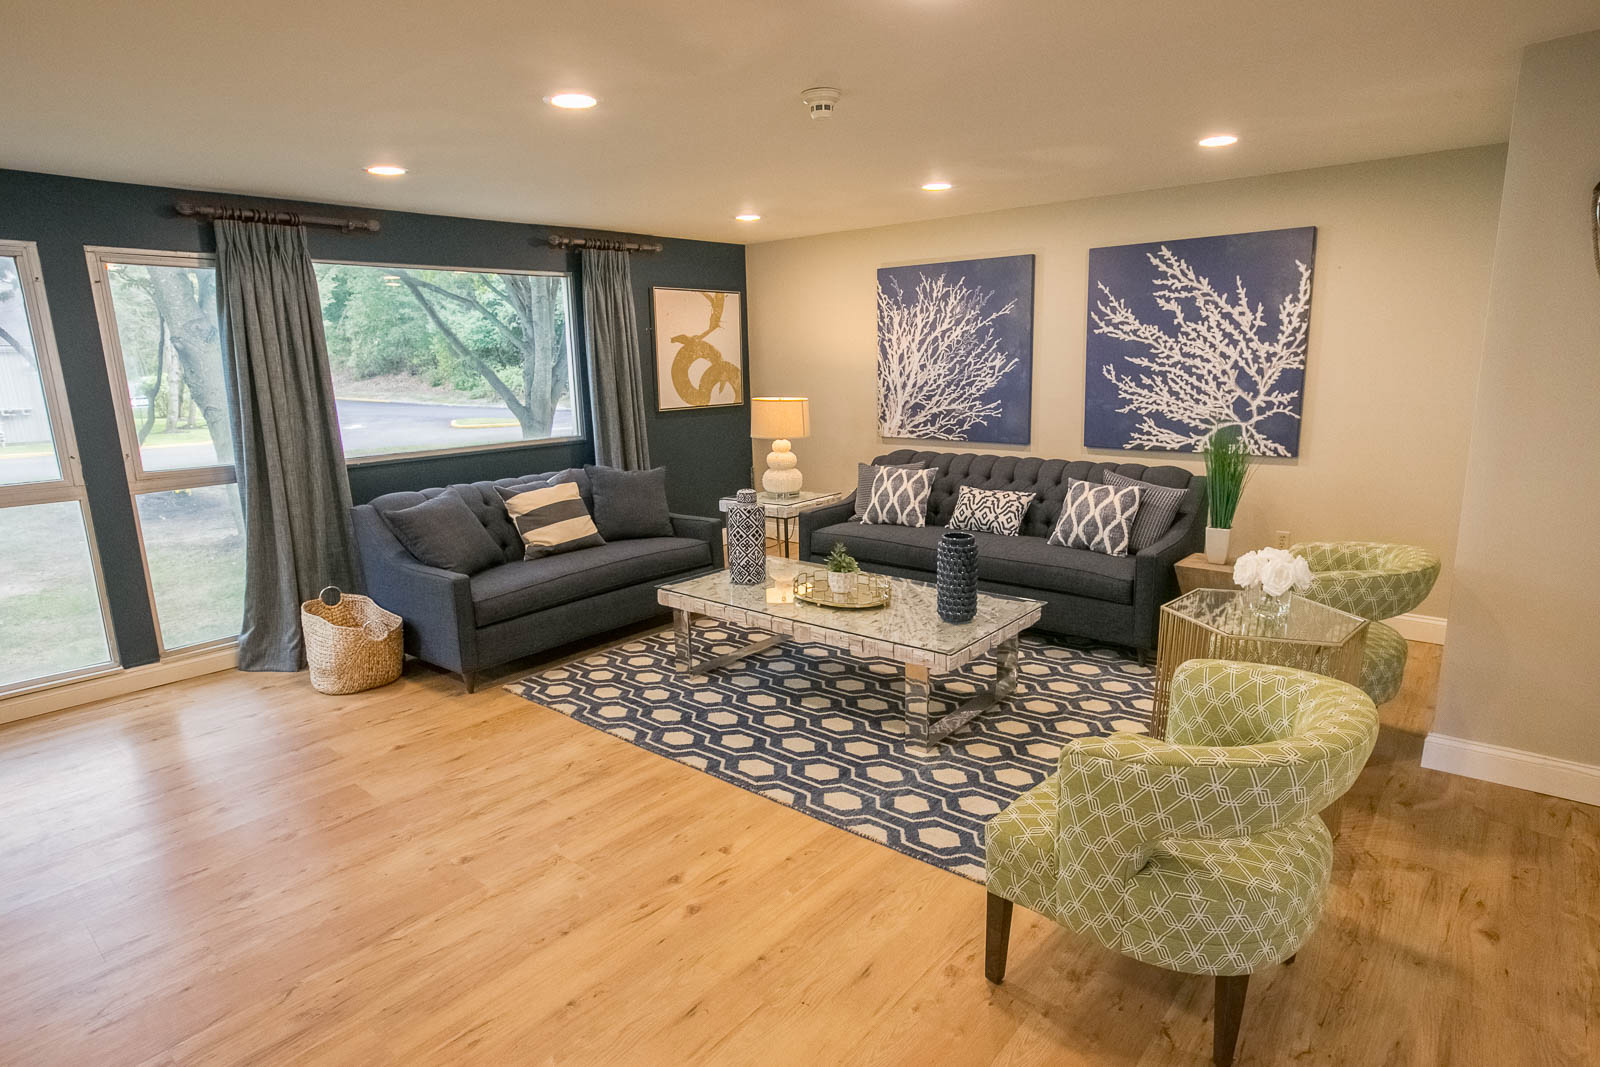 Light hardwood floor, a blue and white rug, blue couches, green and white chairs, a grey coffee table, a white wall, a blue wall with windows, and blue curtains